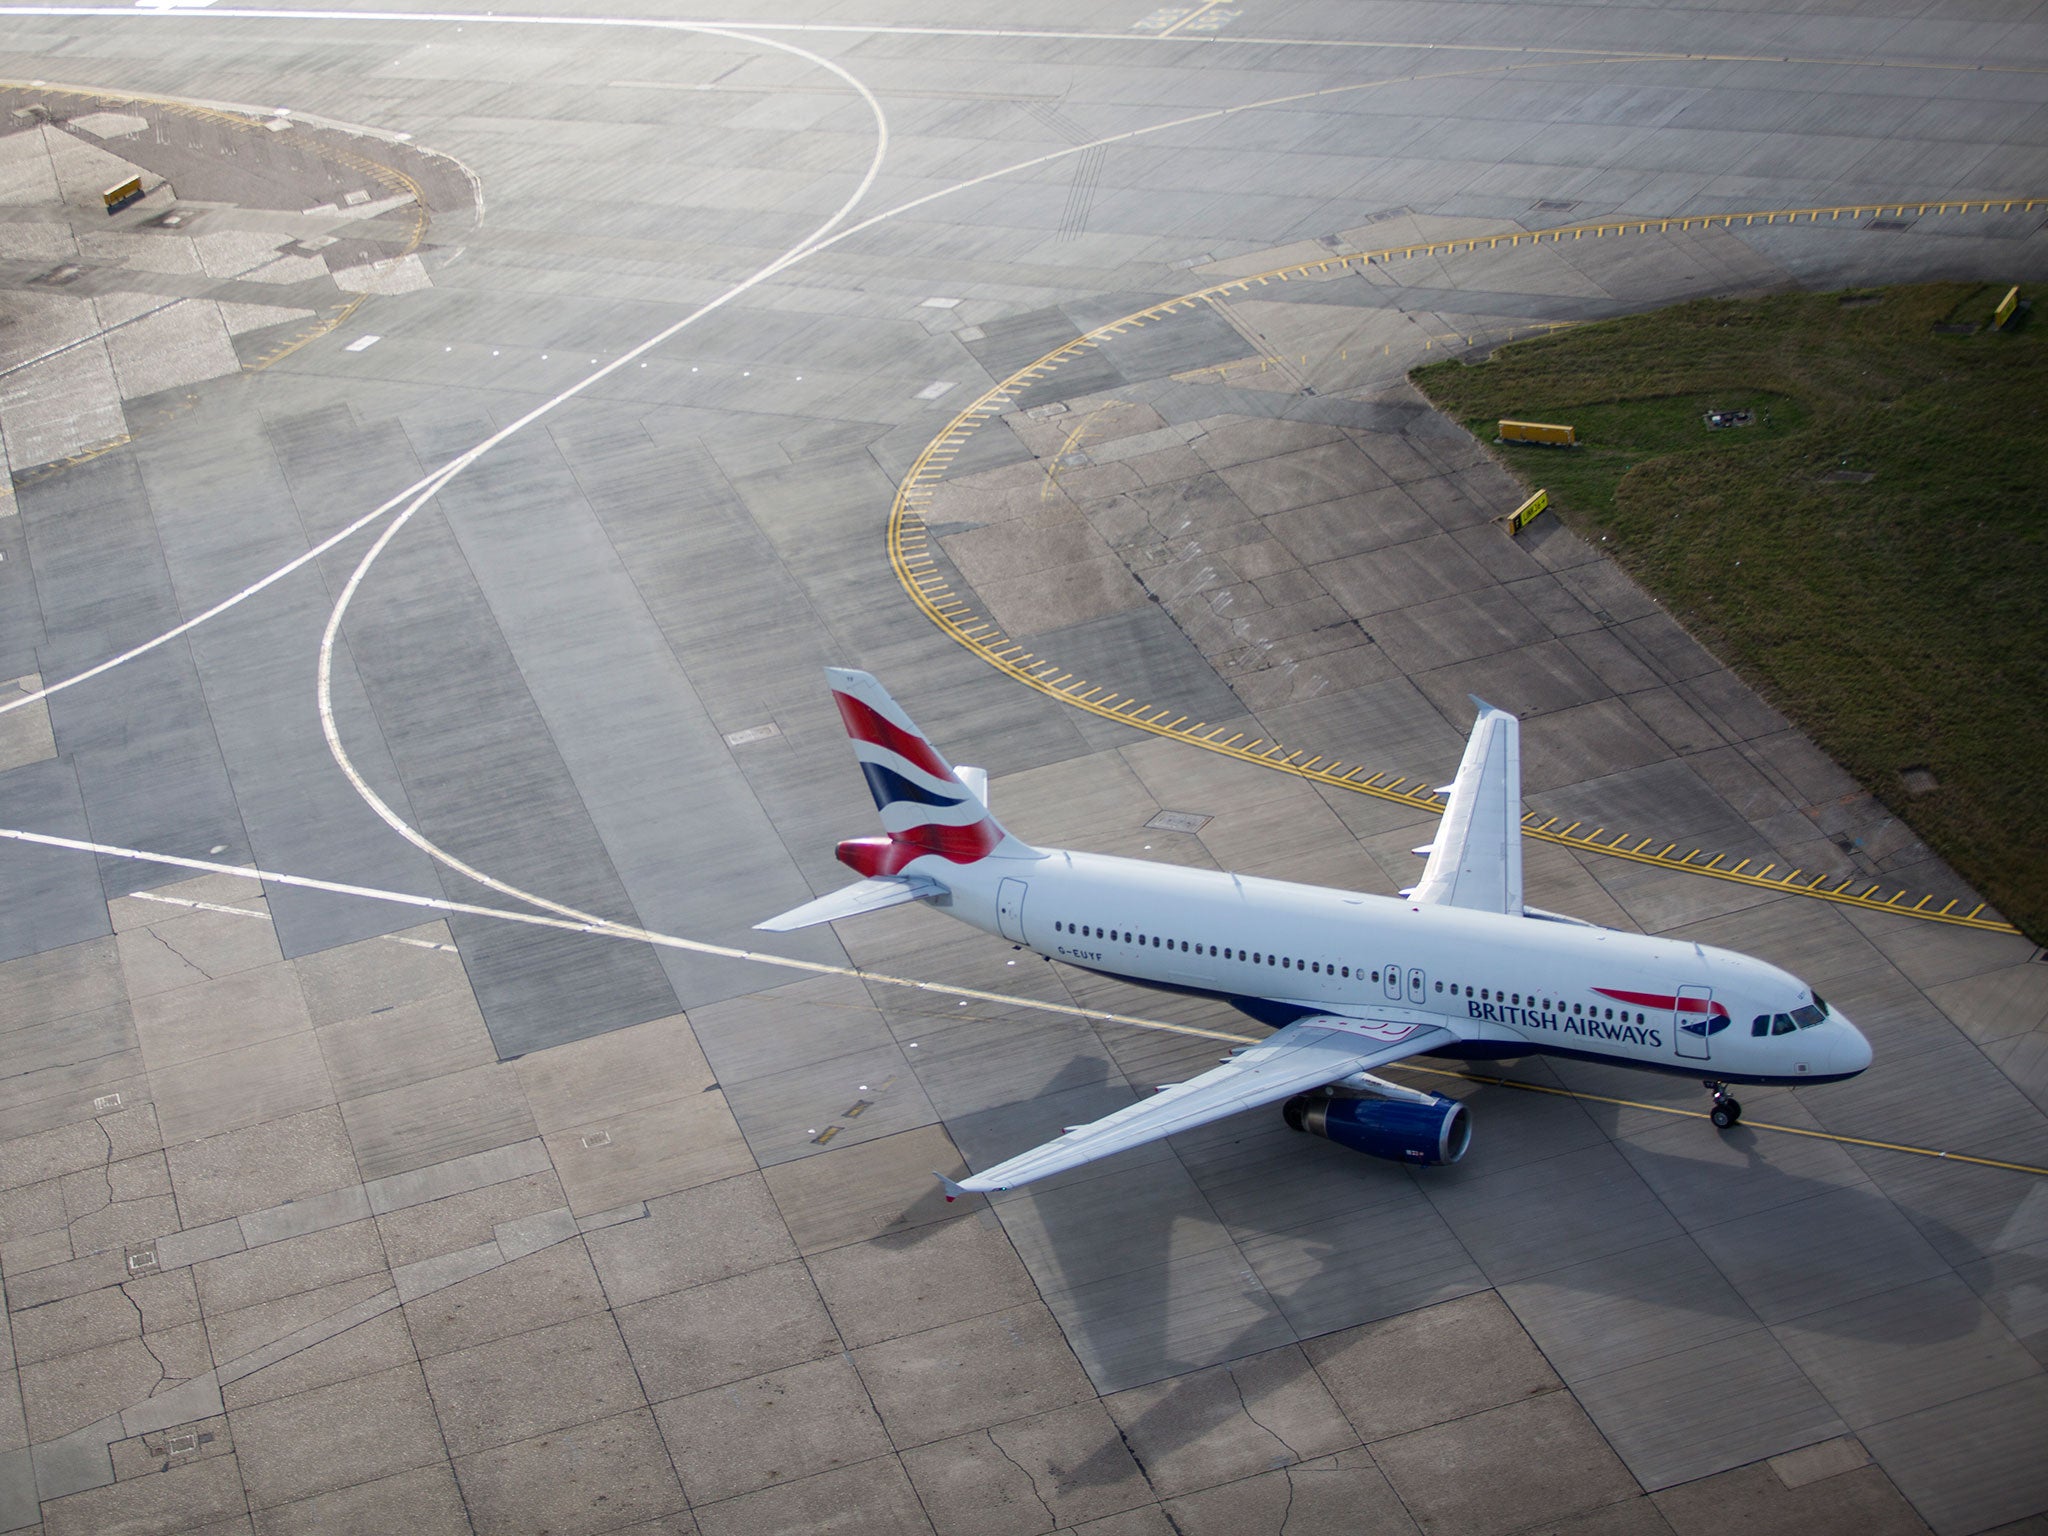 Most carriers, including BA, have strict rules when passengers fail to turn up for check-in